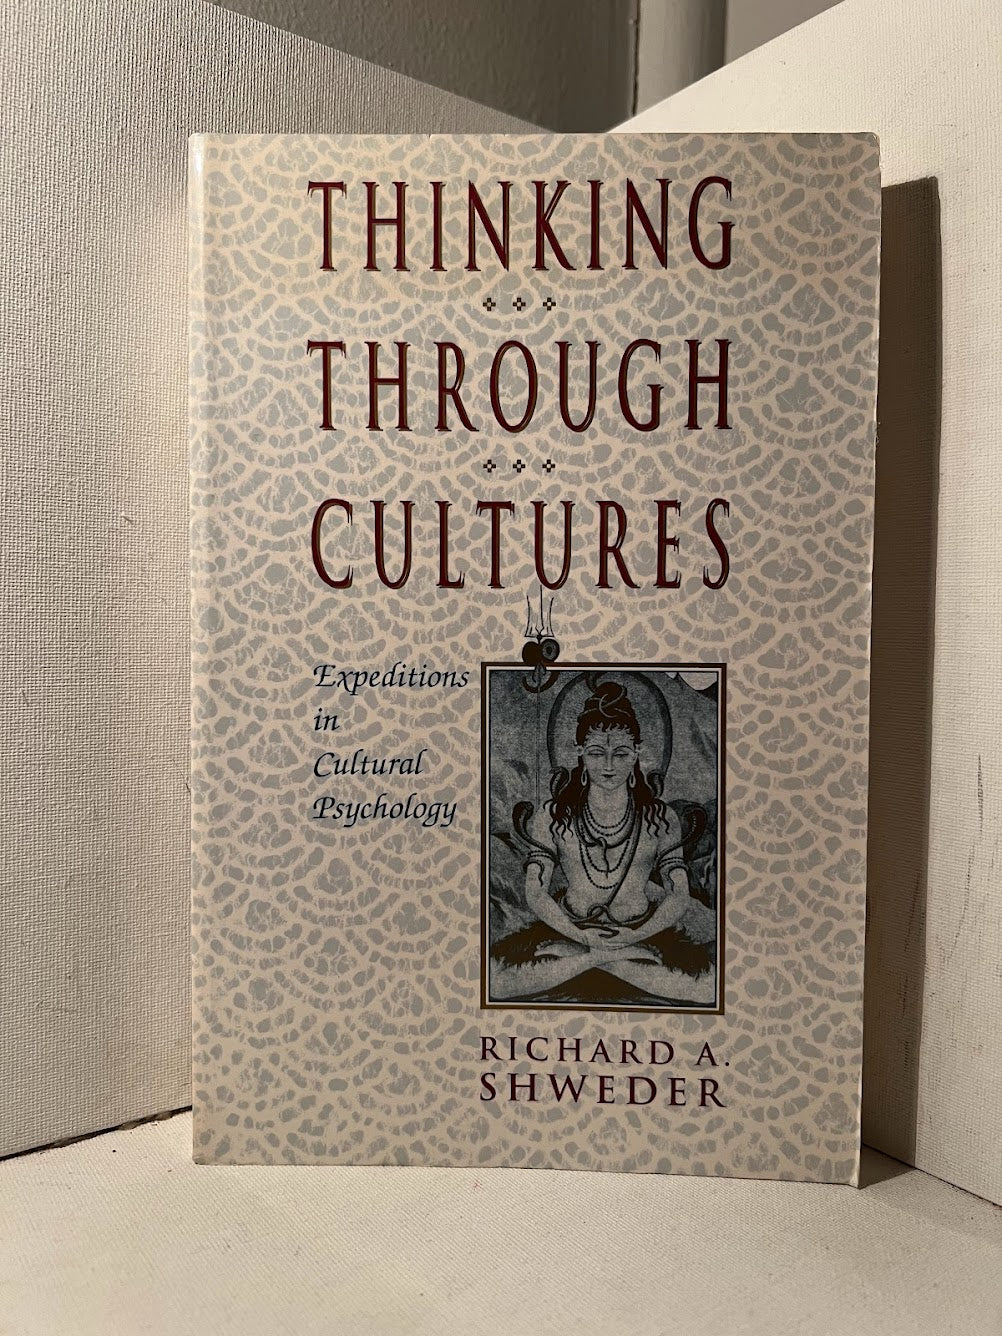 Thinking Through Cultures by Richard A. Shweder